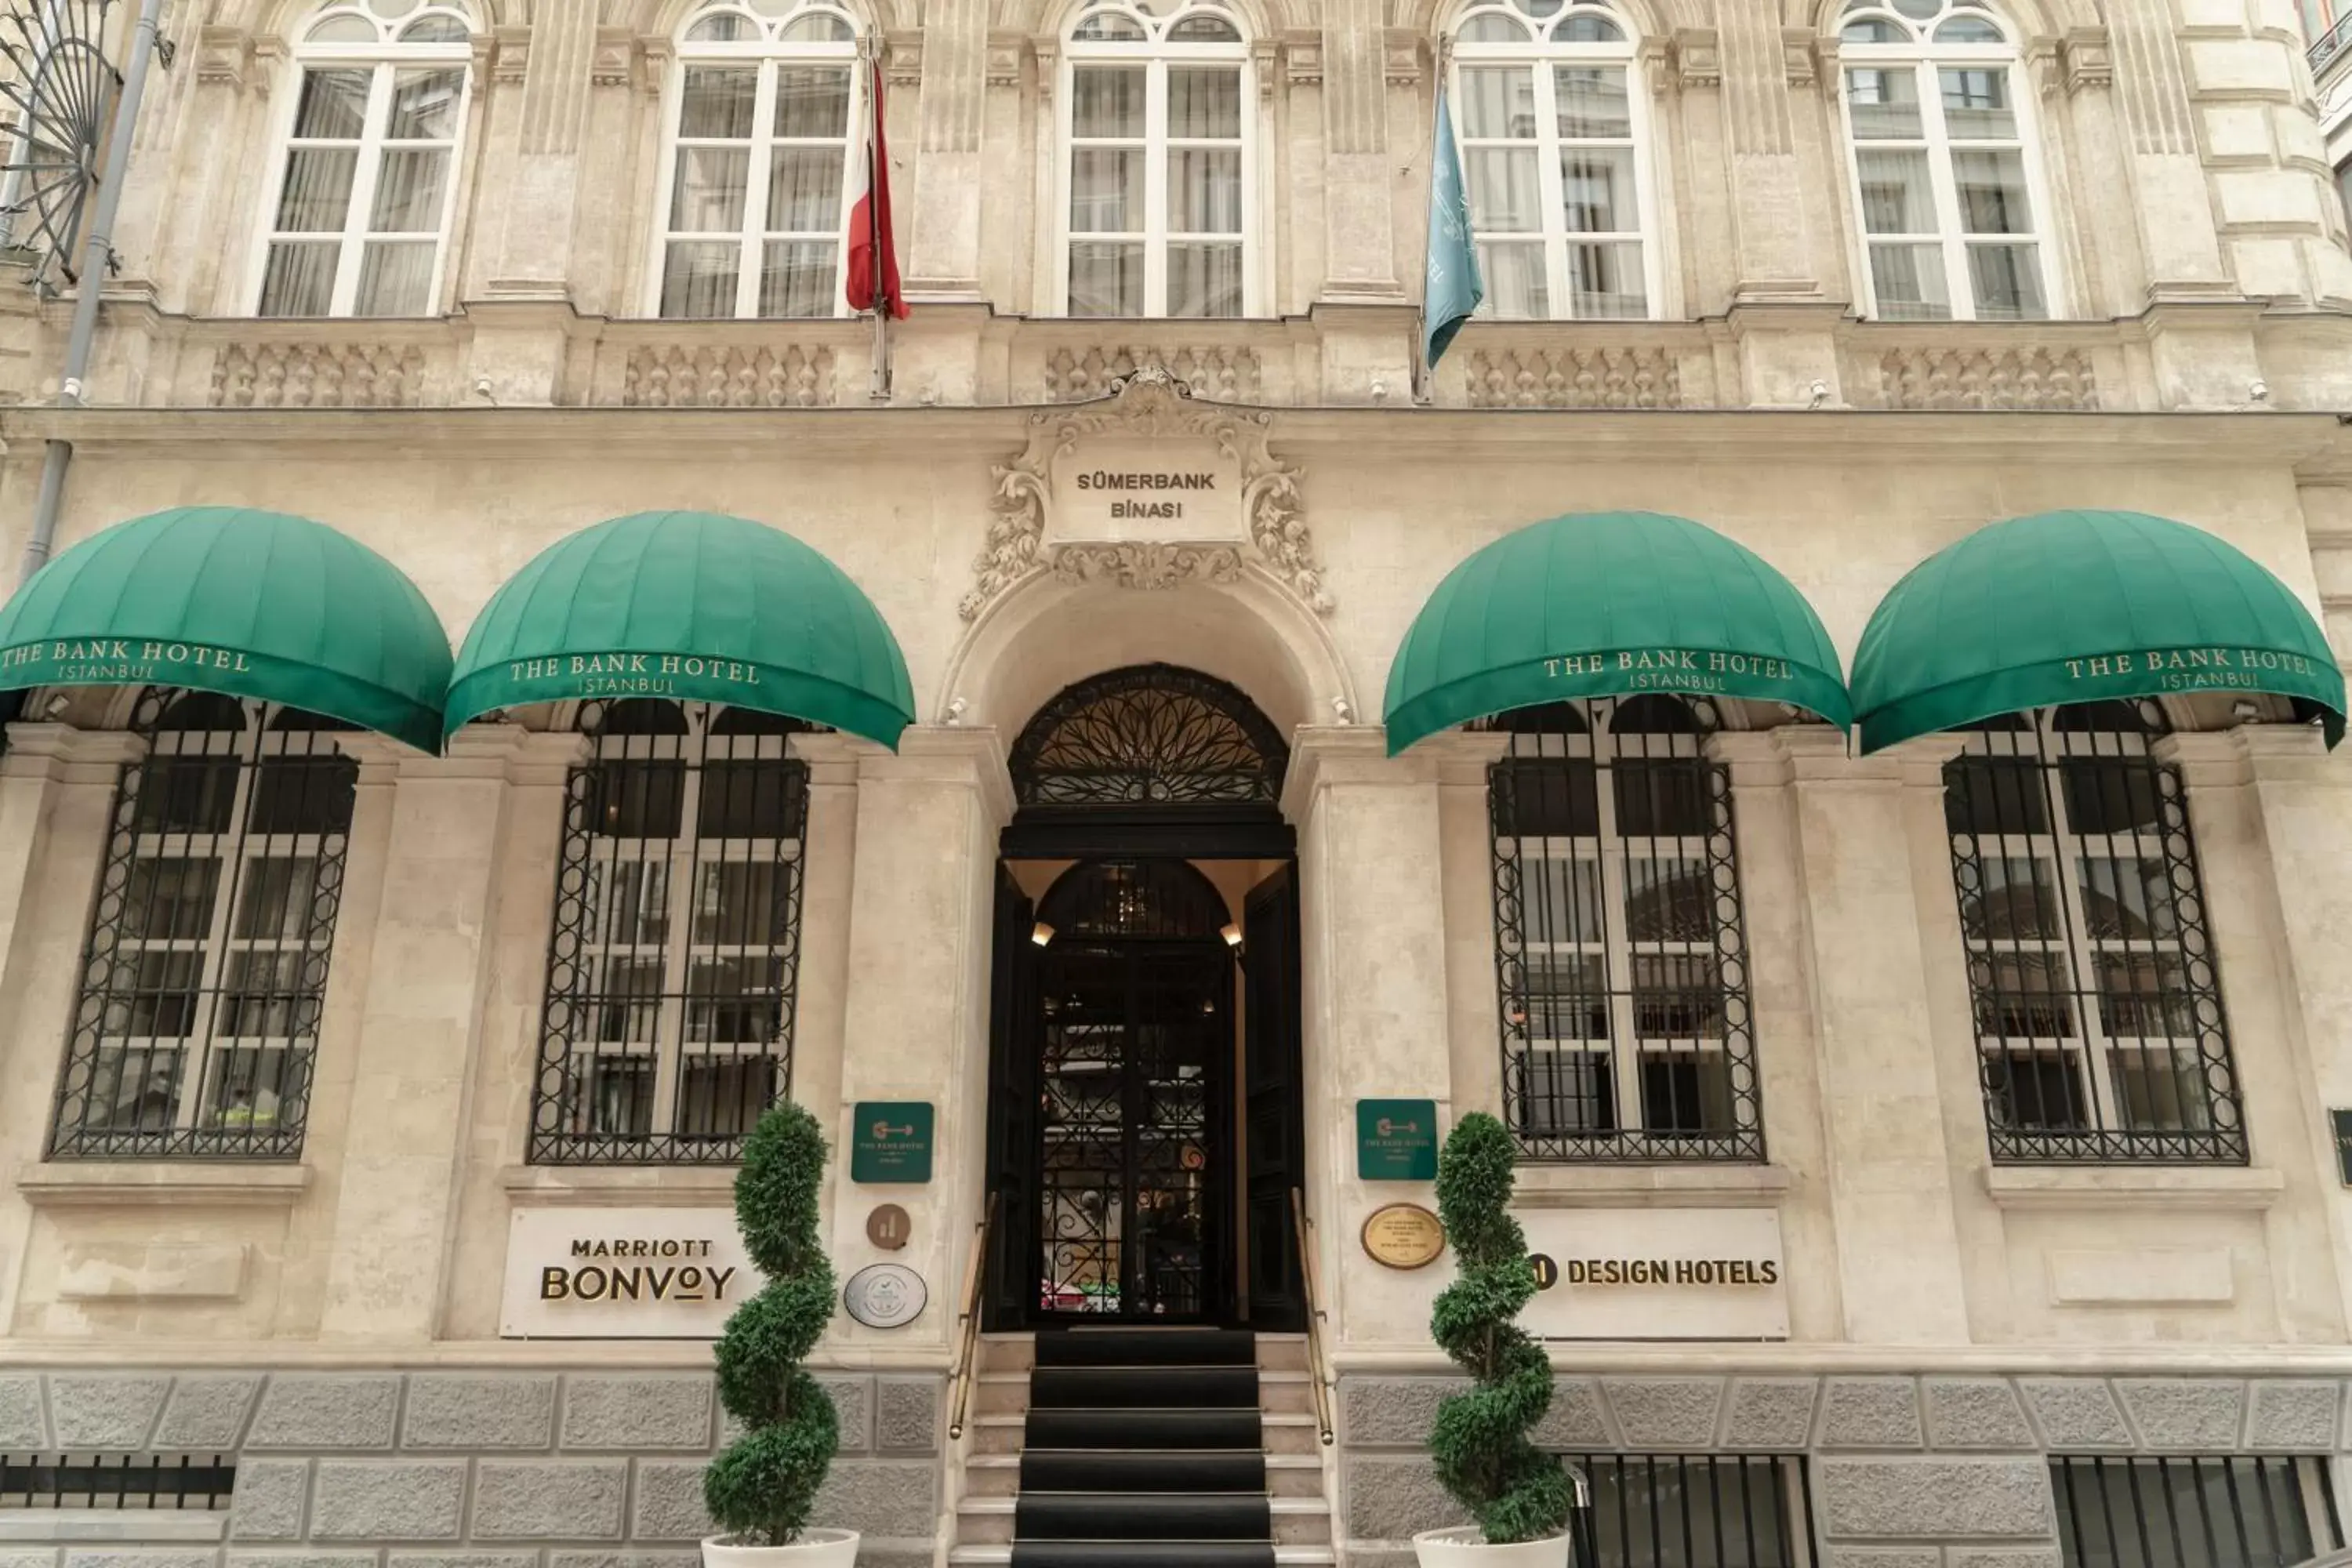 Property building in The Bank Hotel Istanbul, a Member of Design Hotels